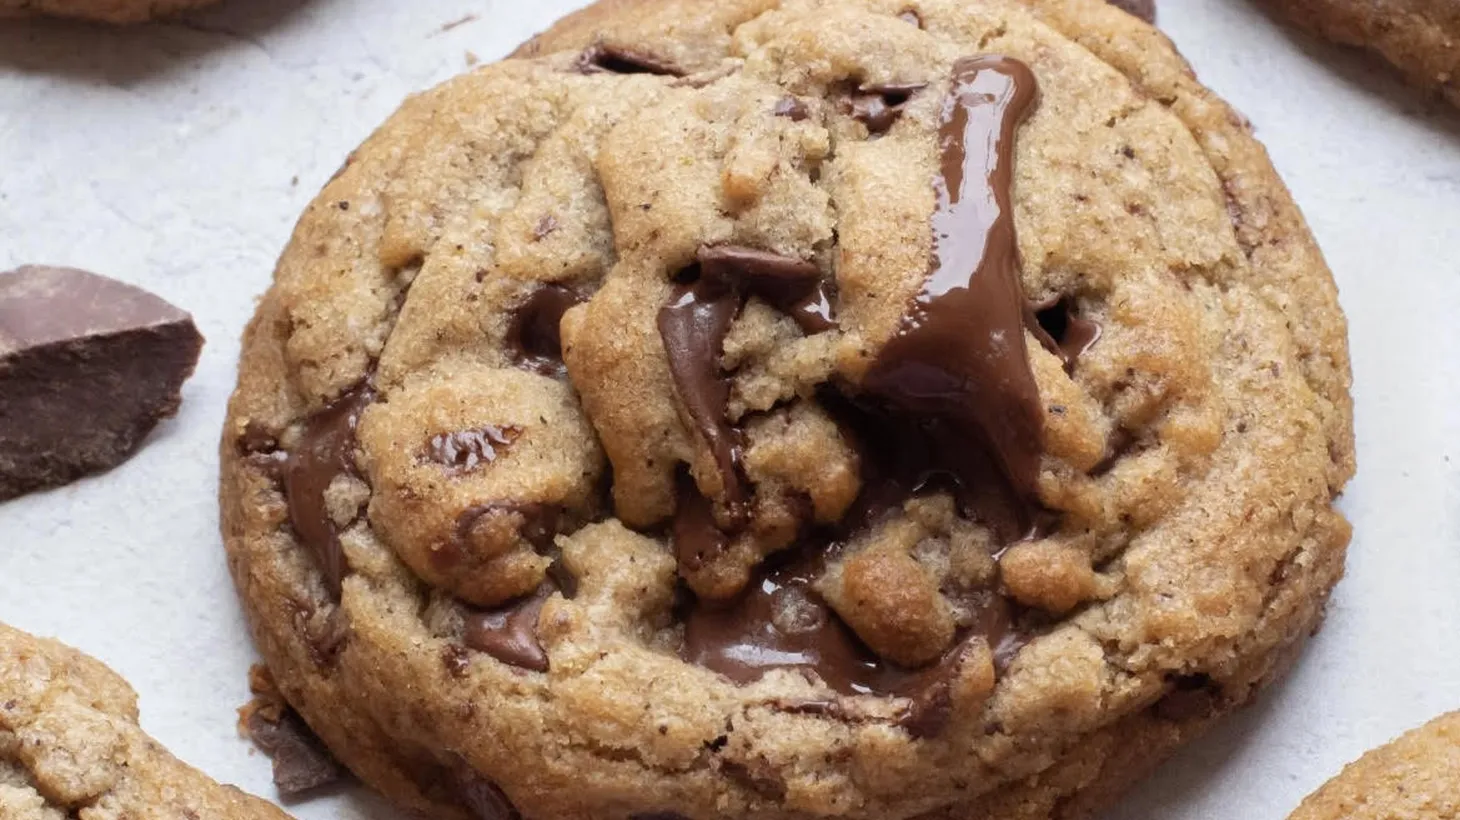 With its crisp edge and soft center, the Brown Butter Chocolate Chip is a favorite at Zooies Cookies.